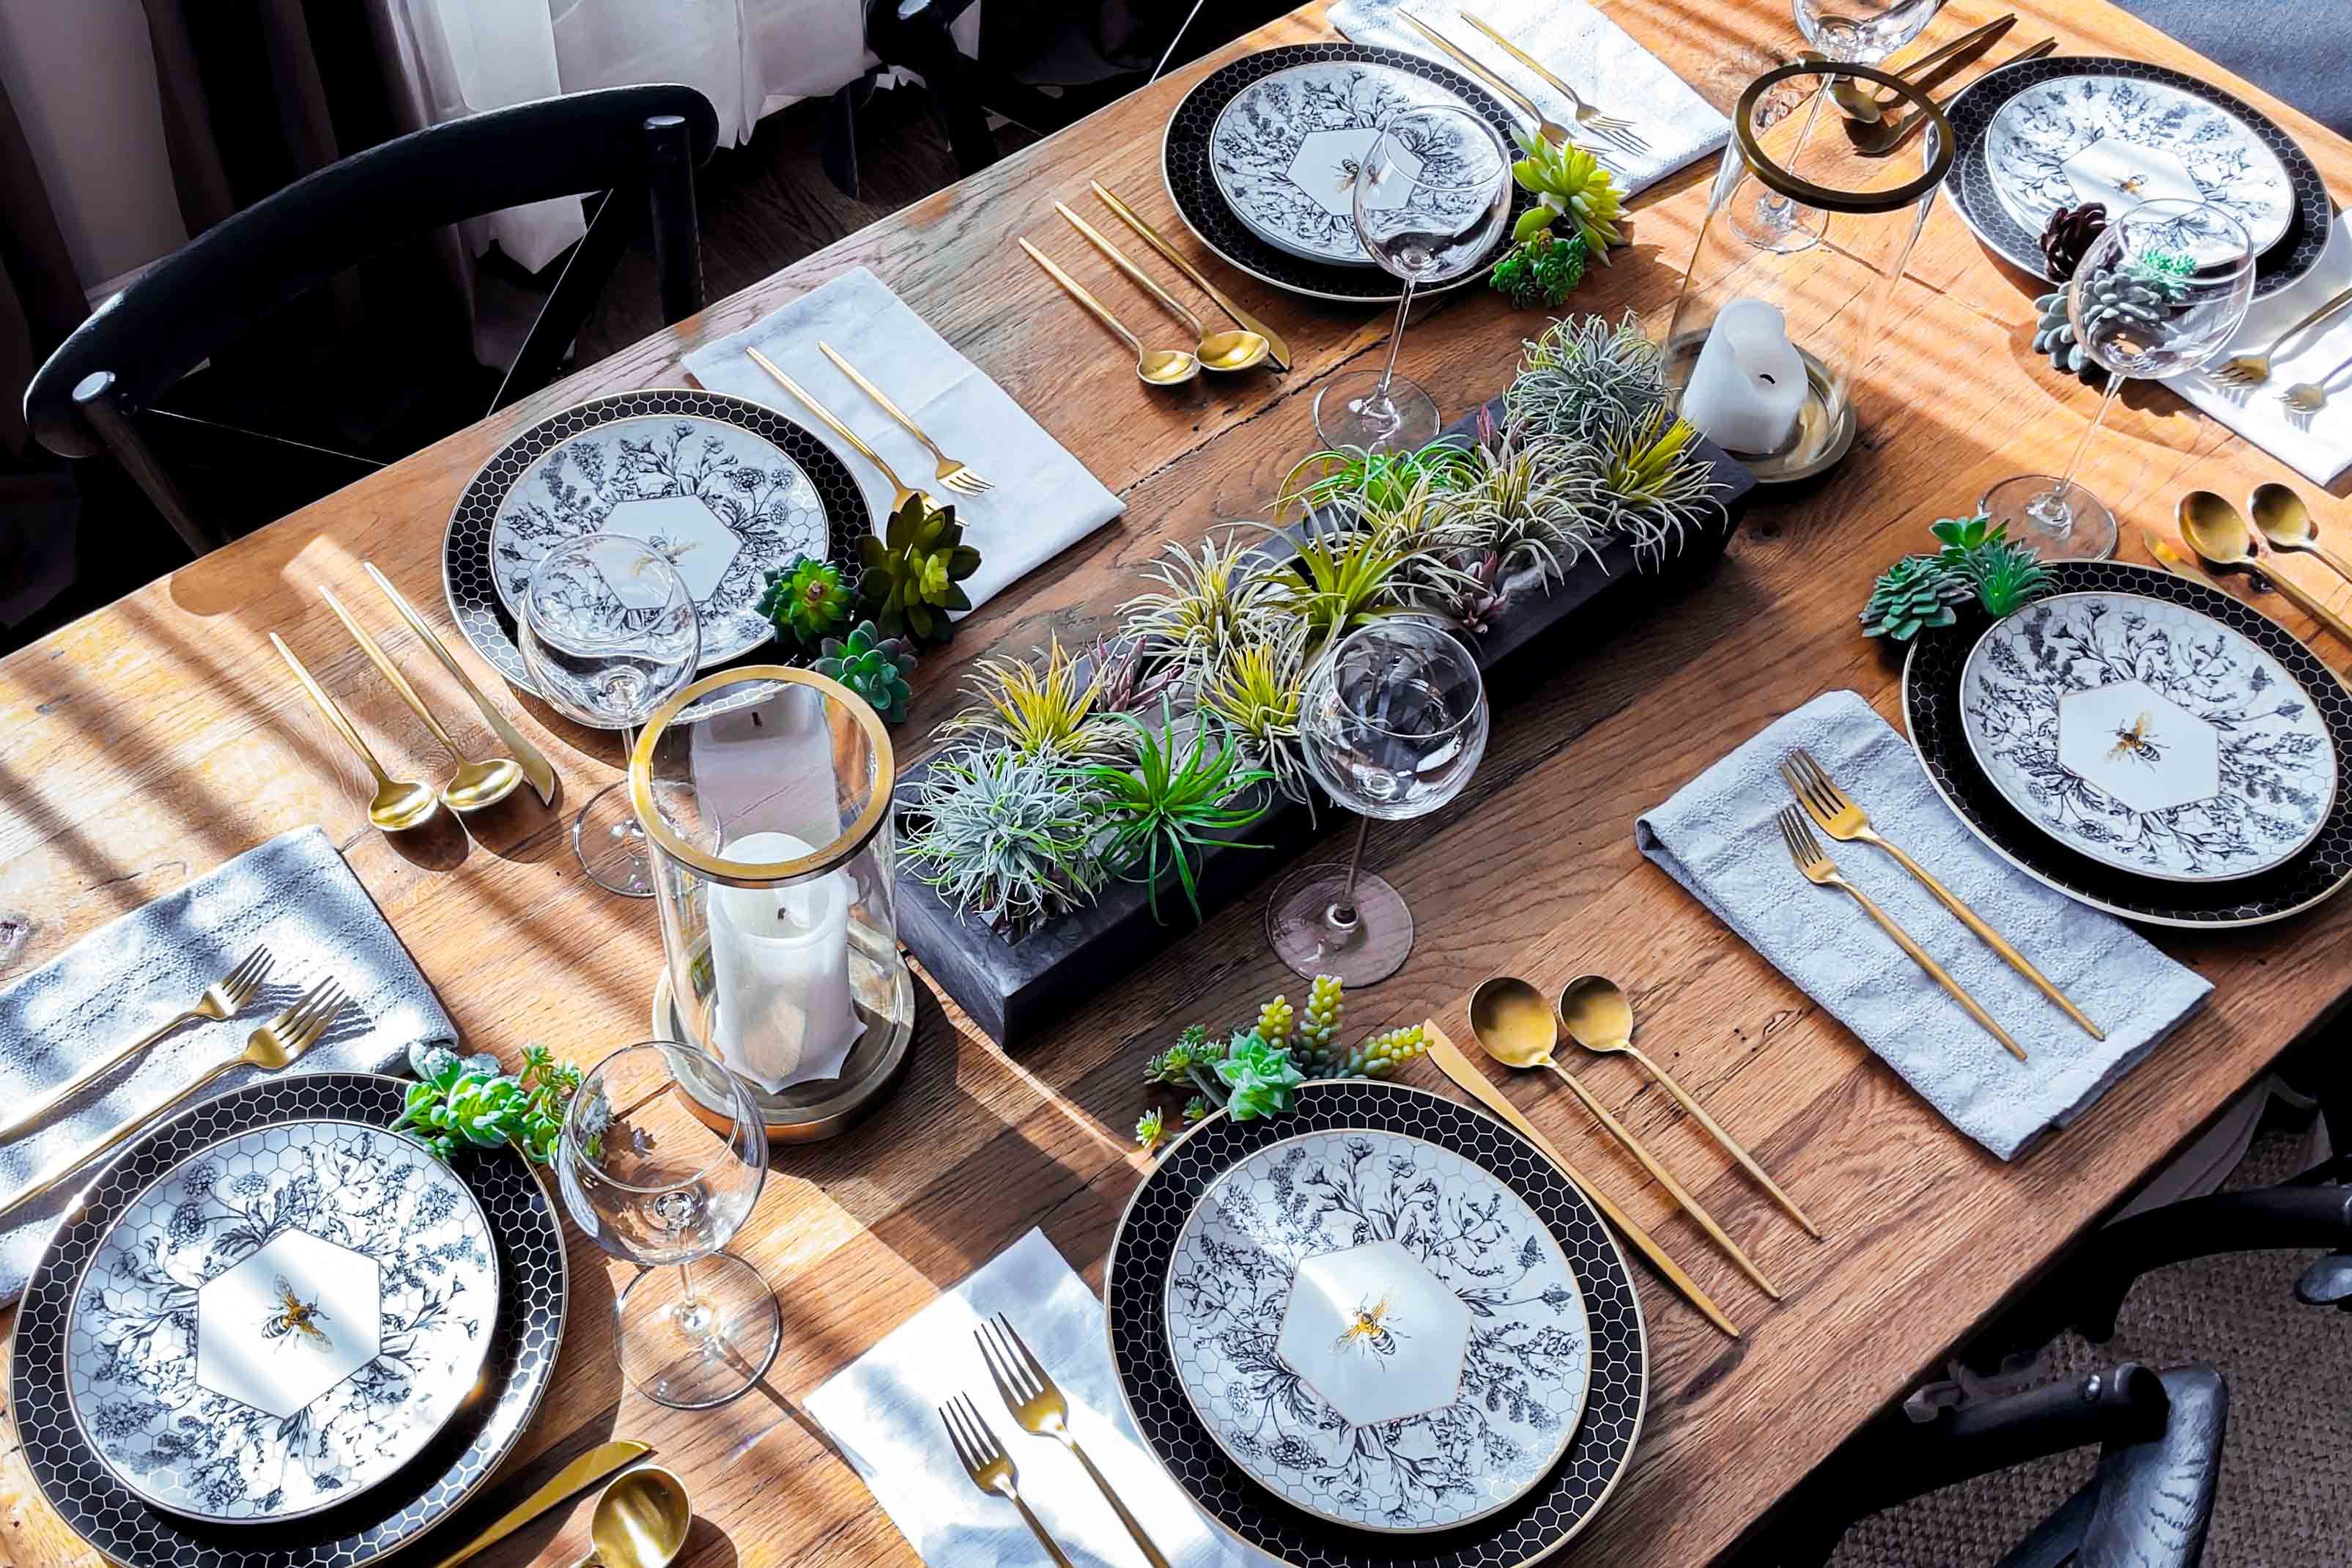 Farmhouse table set with gold flatware, honeybee dinnerware, candles, and succulents.